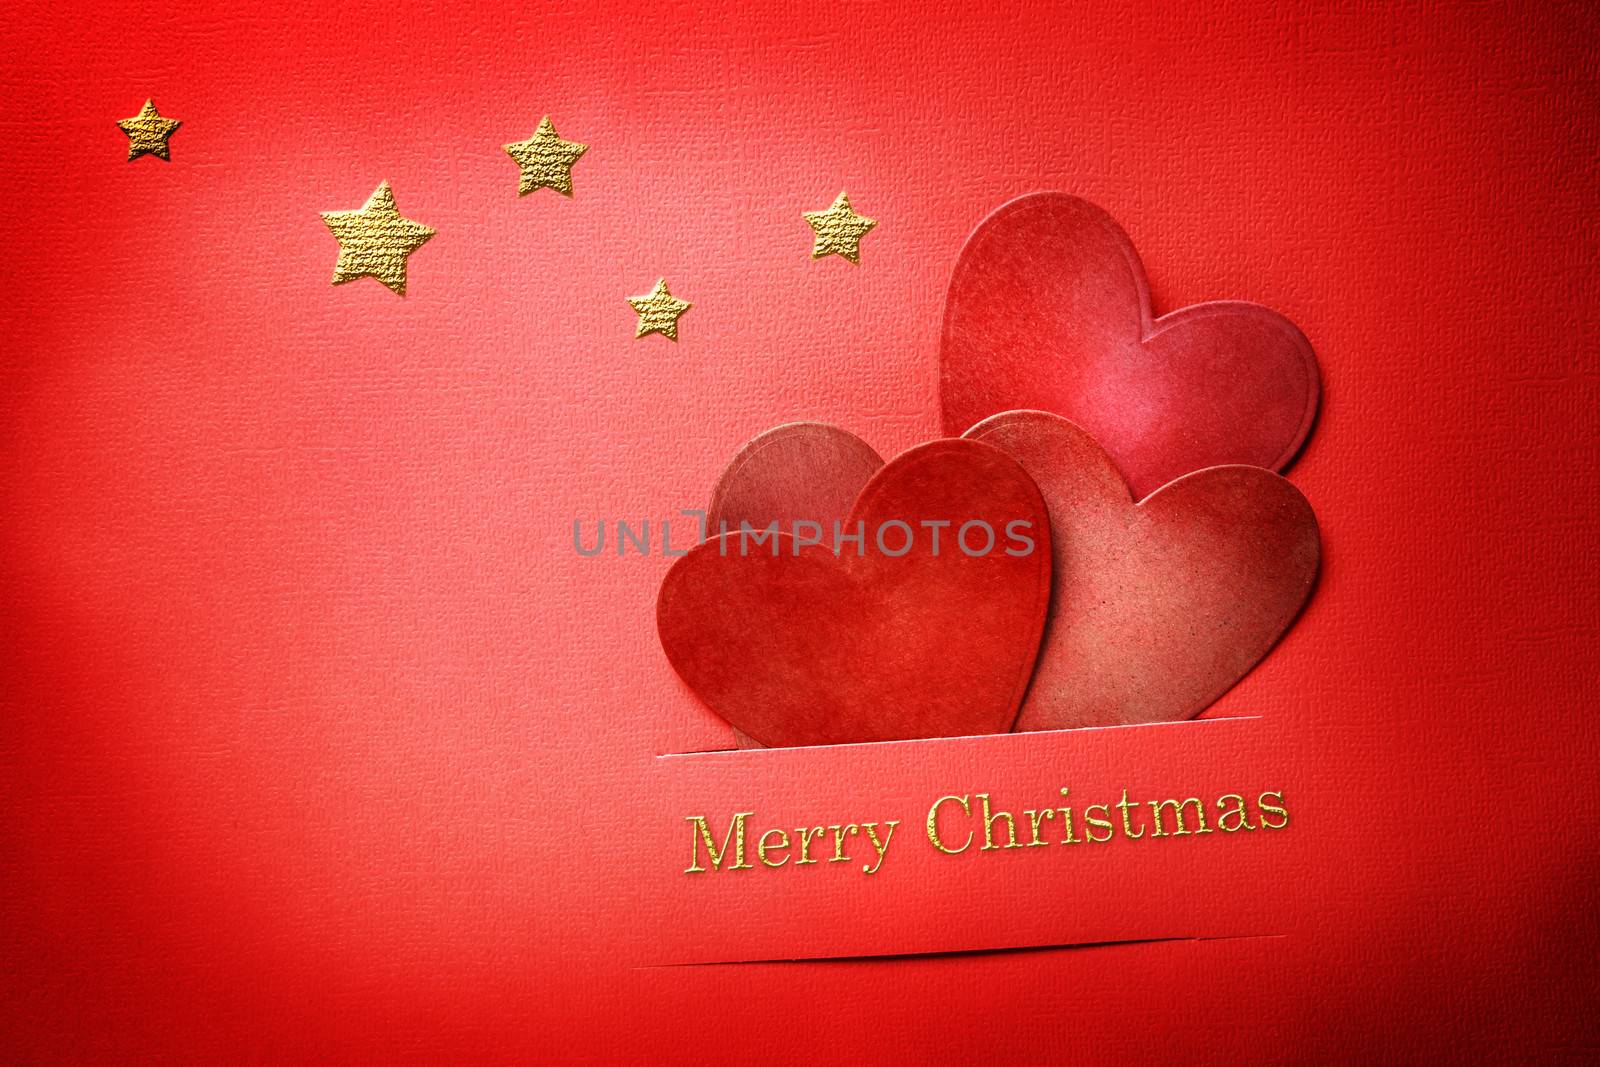 Handmade paper craft Christmas hearts with Merry Christmas text and stars 